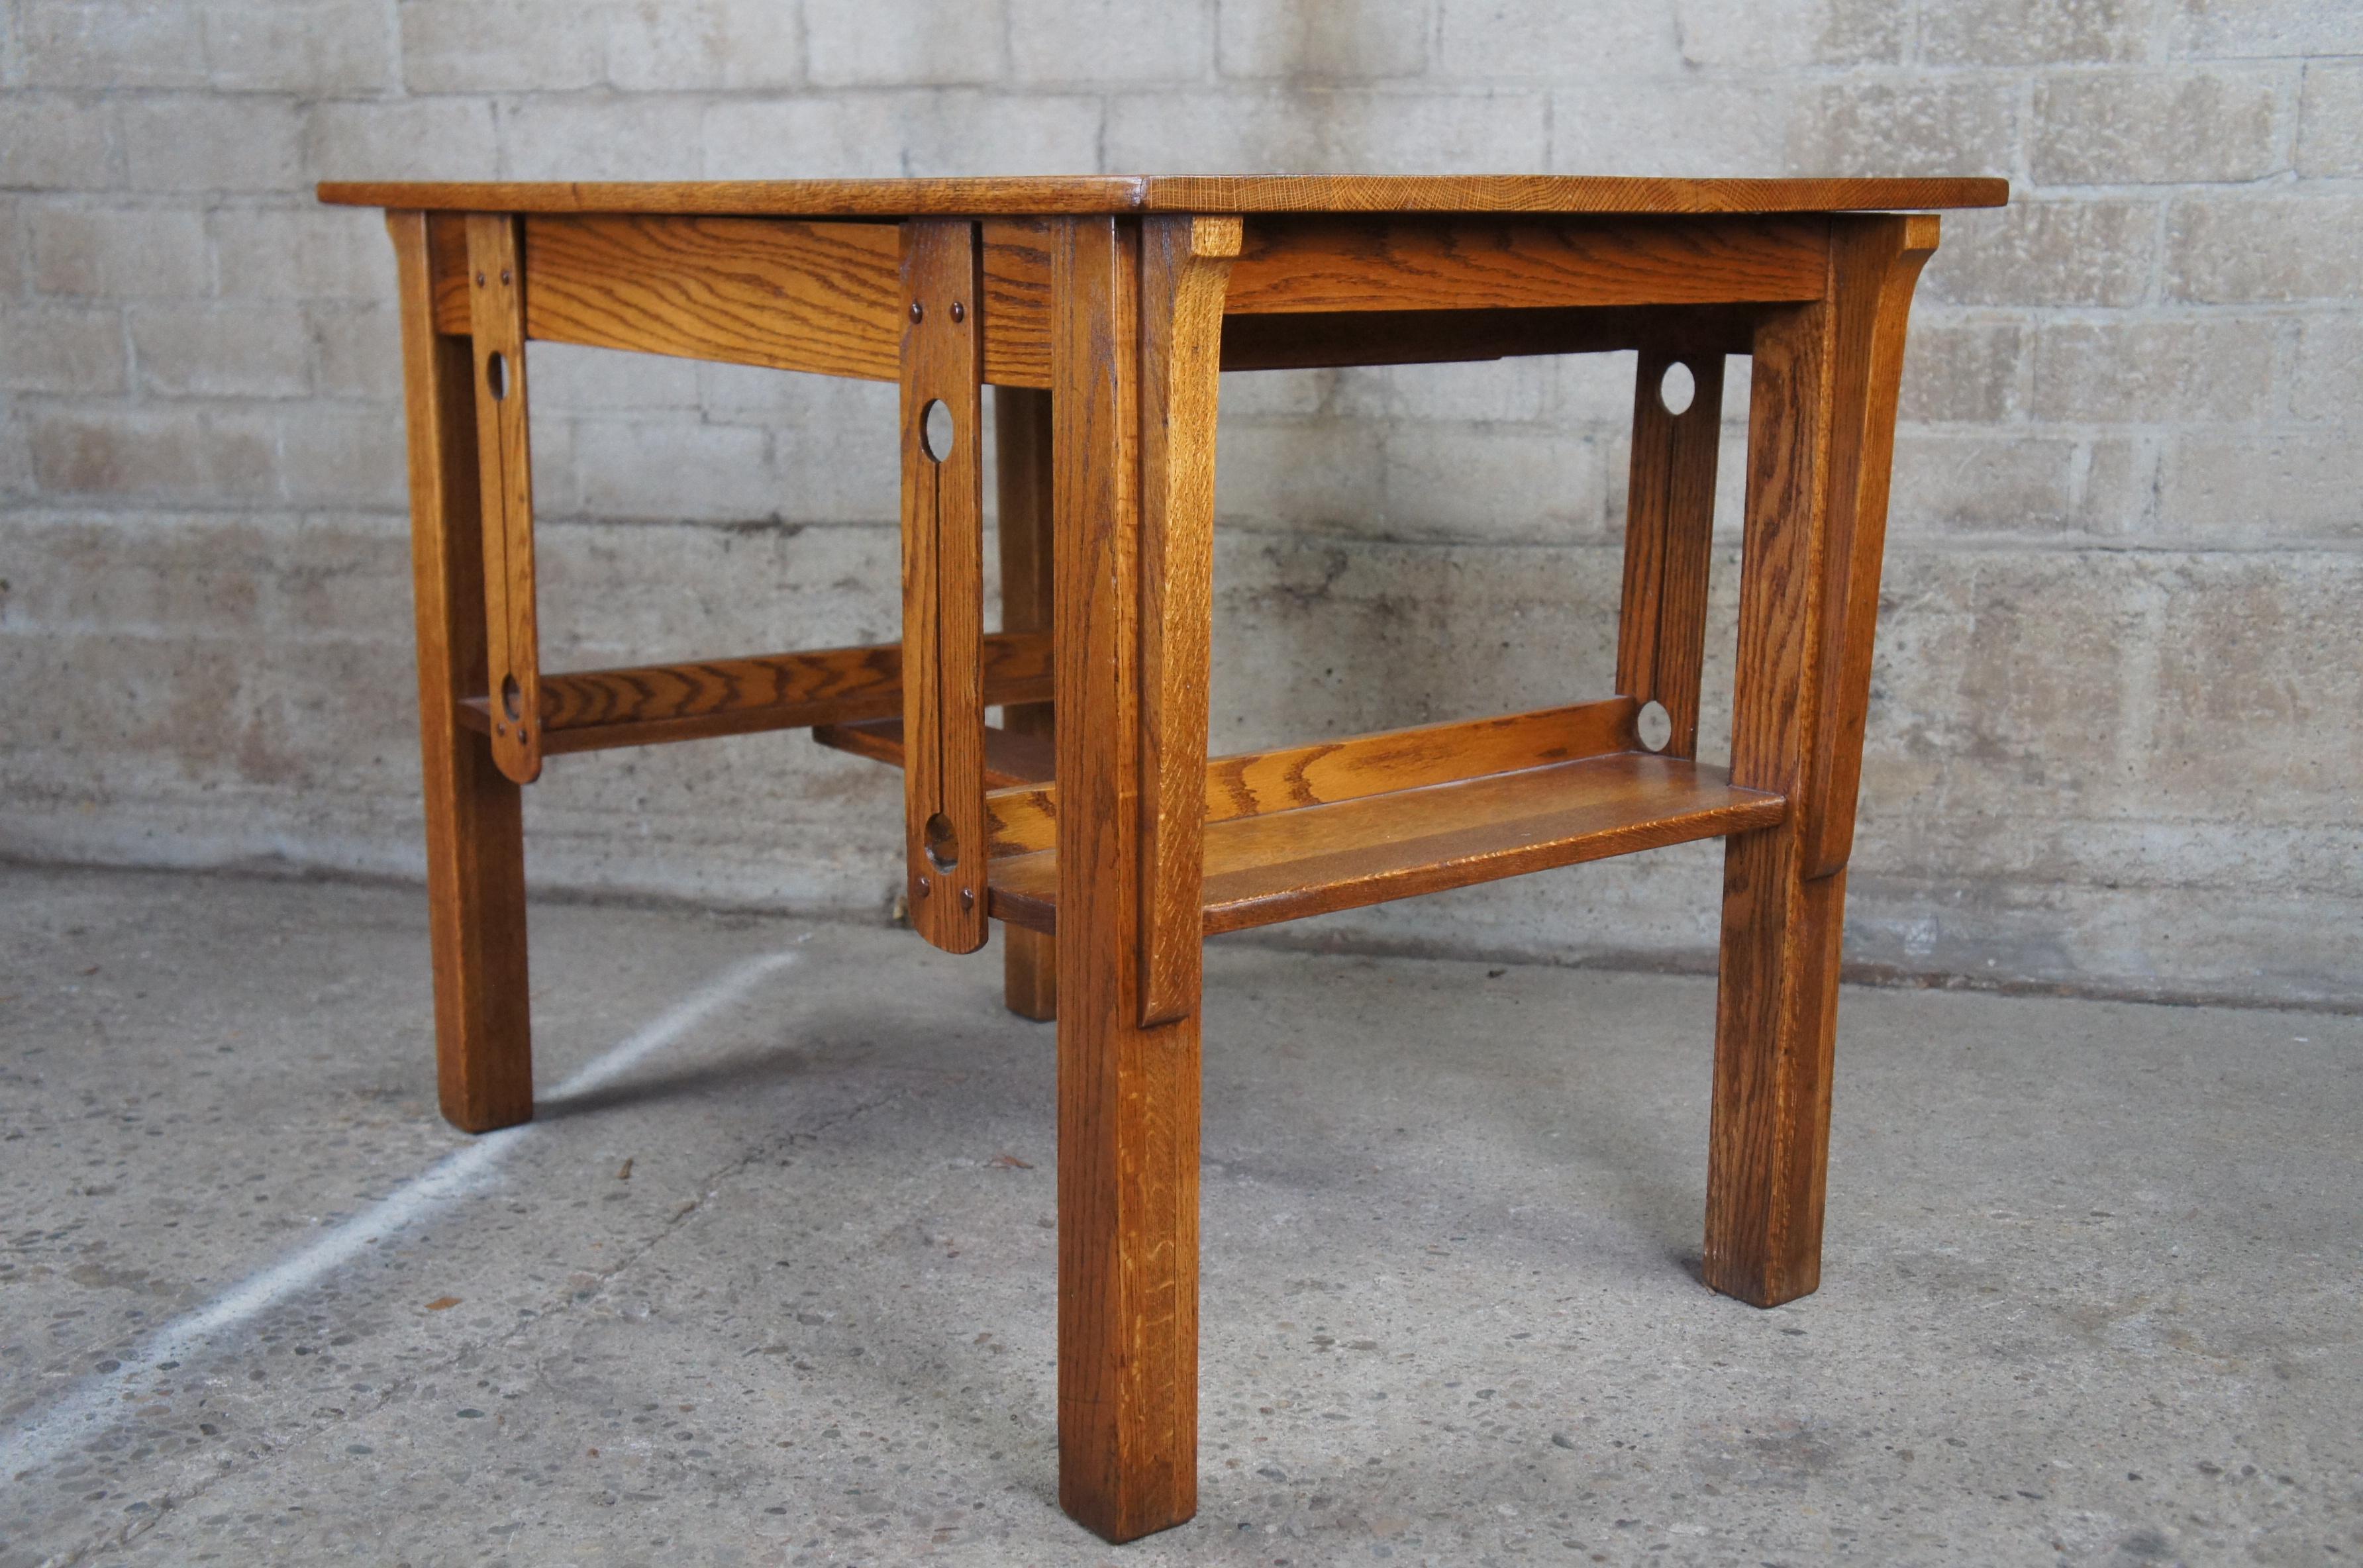 20th Century Antique Wolverine MFG Co Arts & Crafts Oak Mission Library Bookcase Table Desk